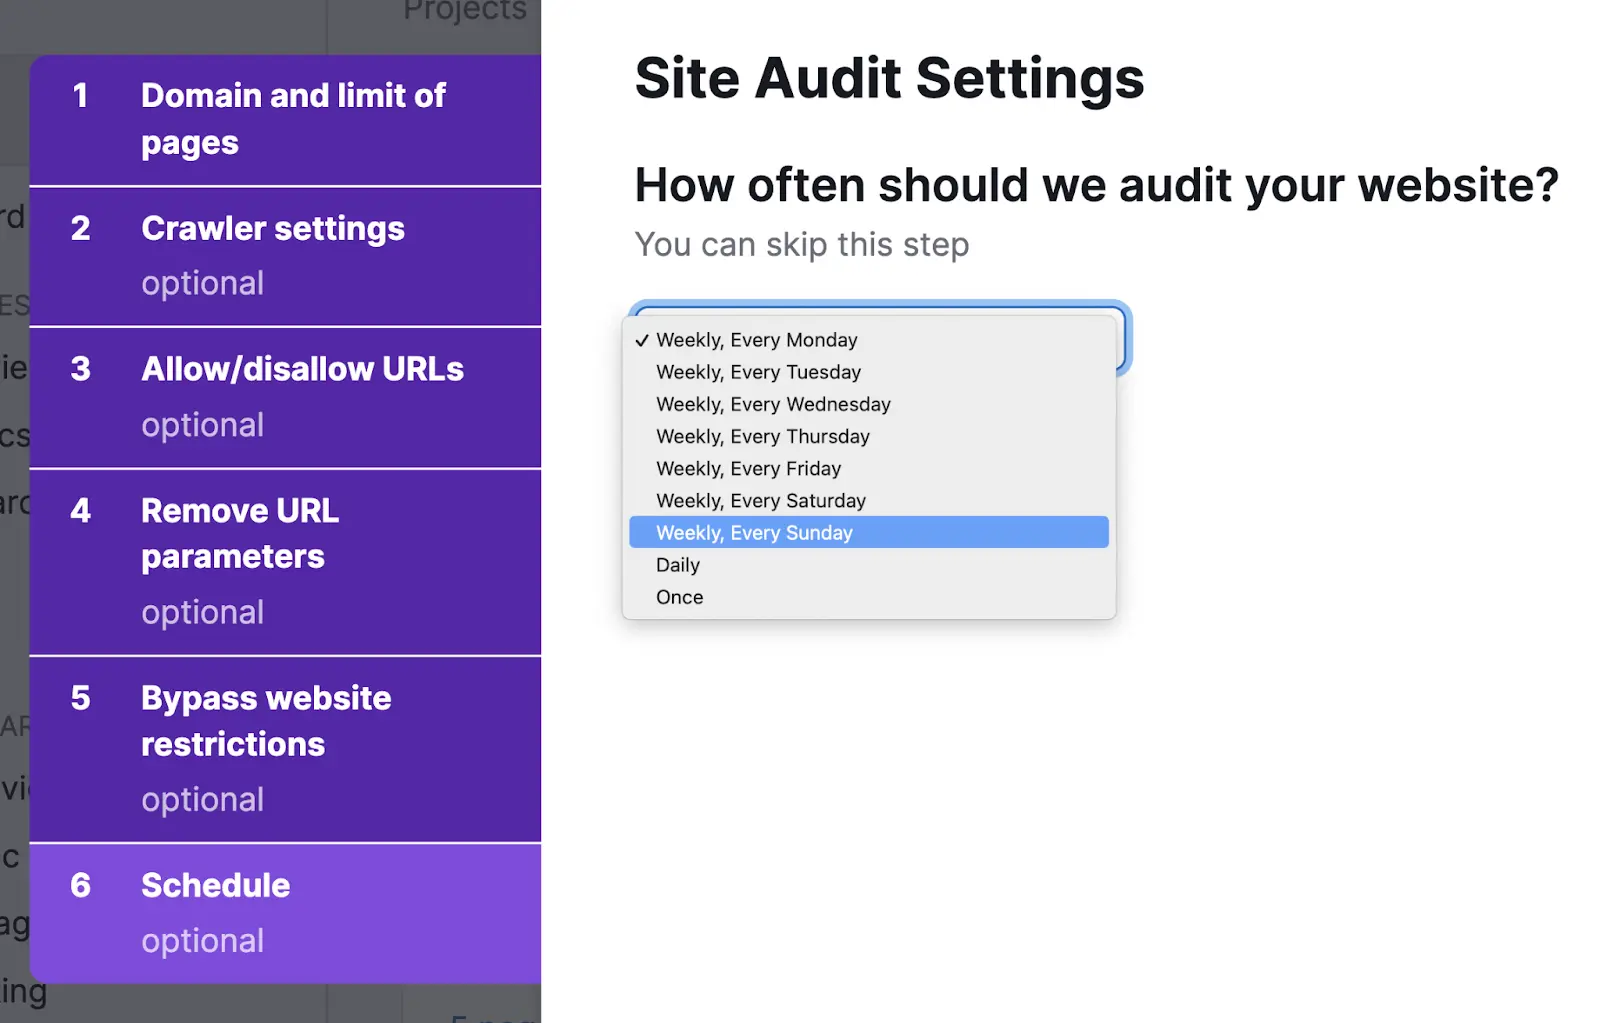 Site Audit Settings window, showing how to schedule audits